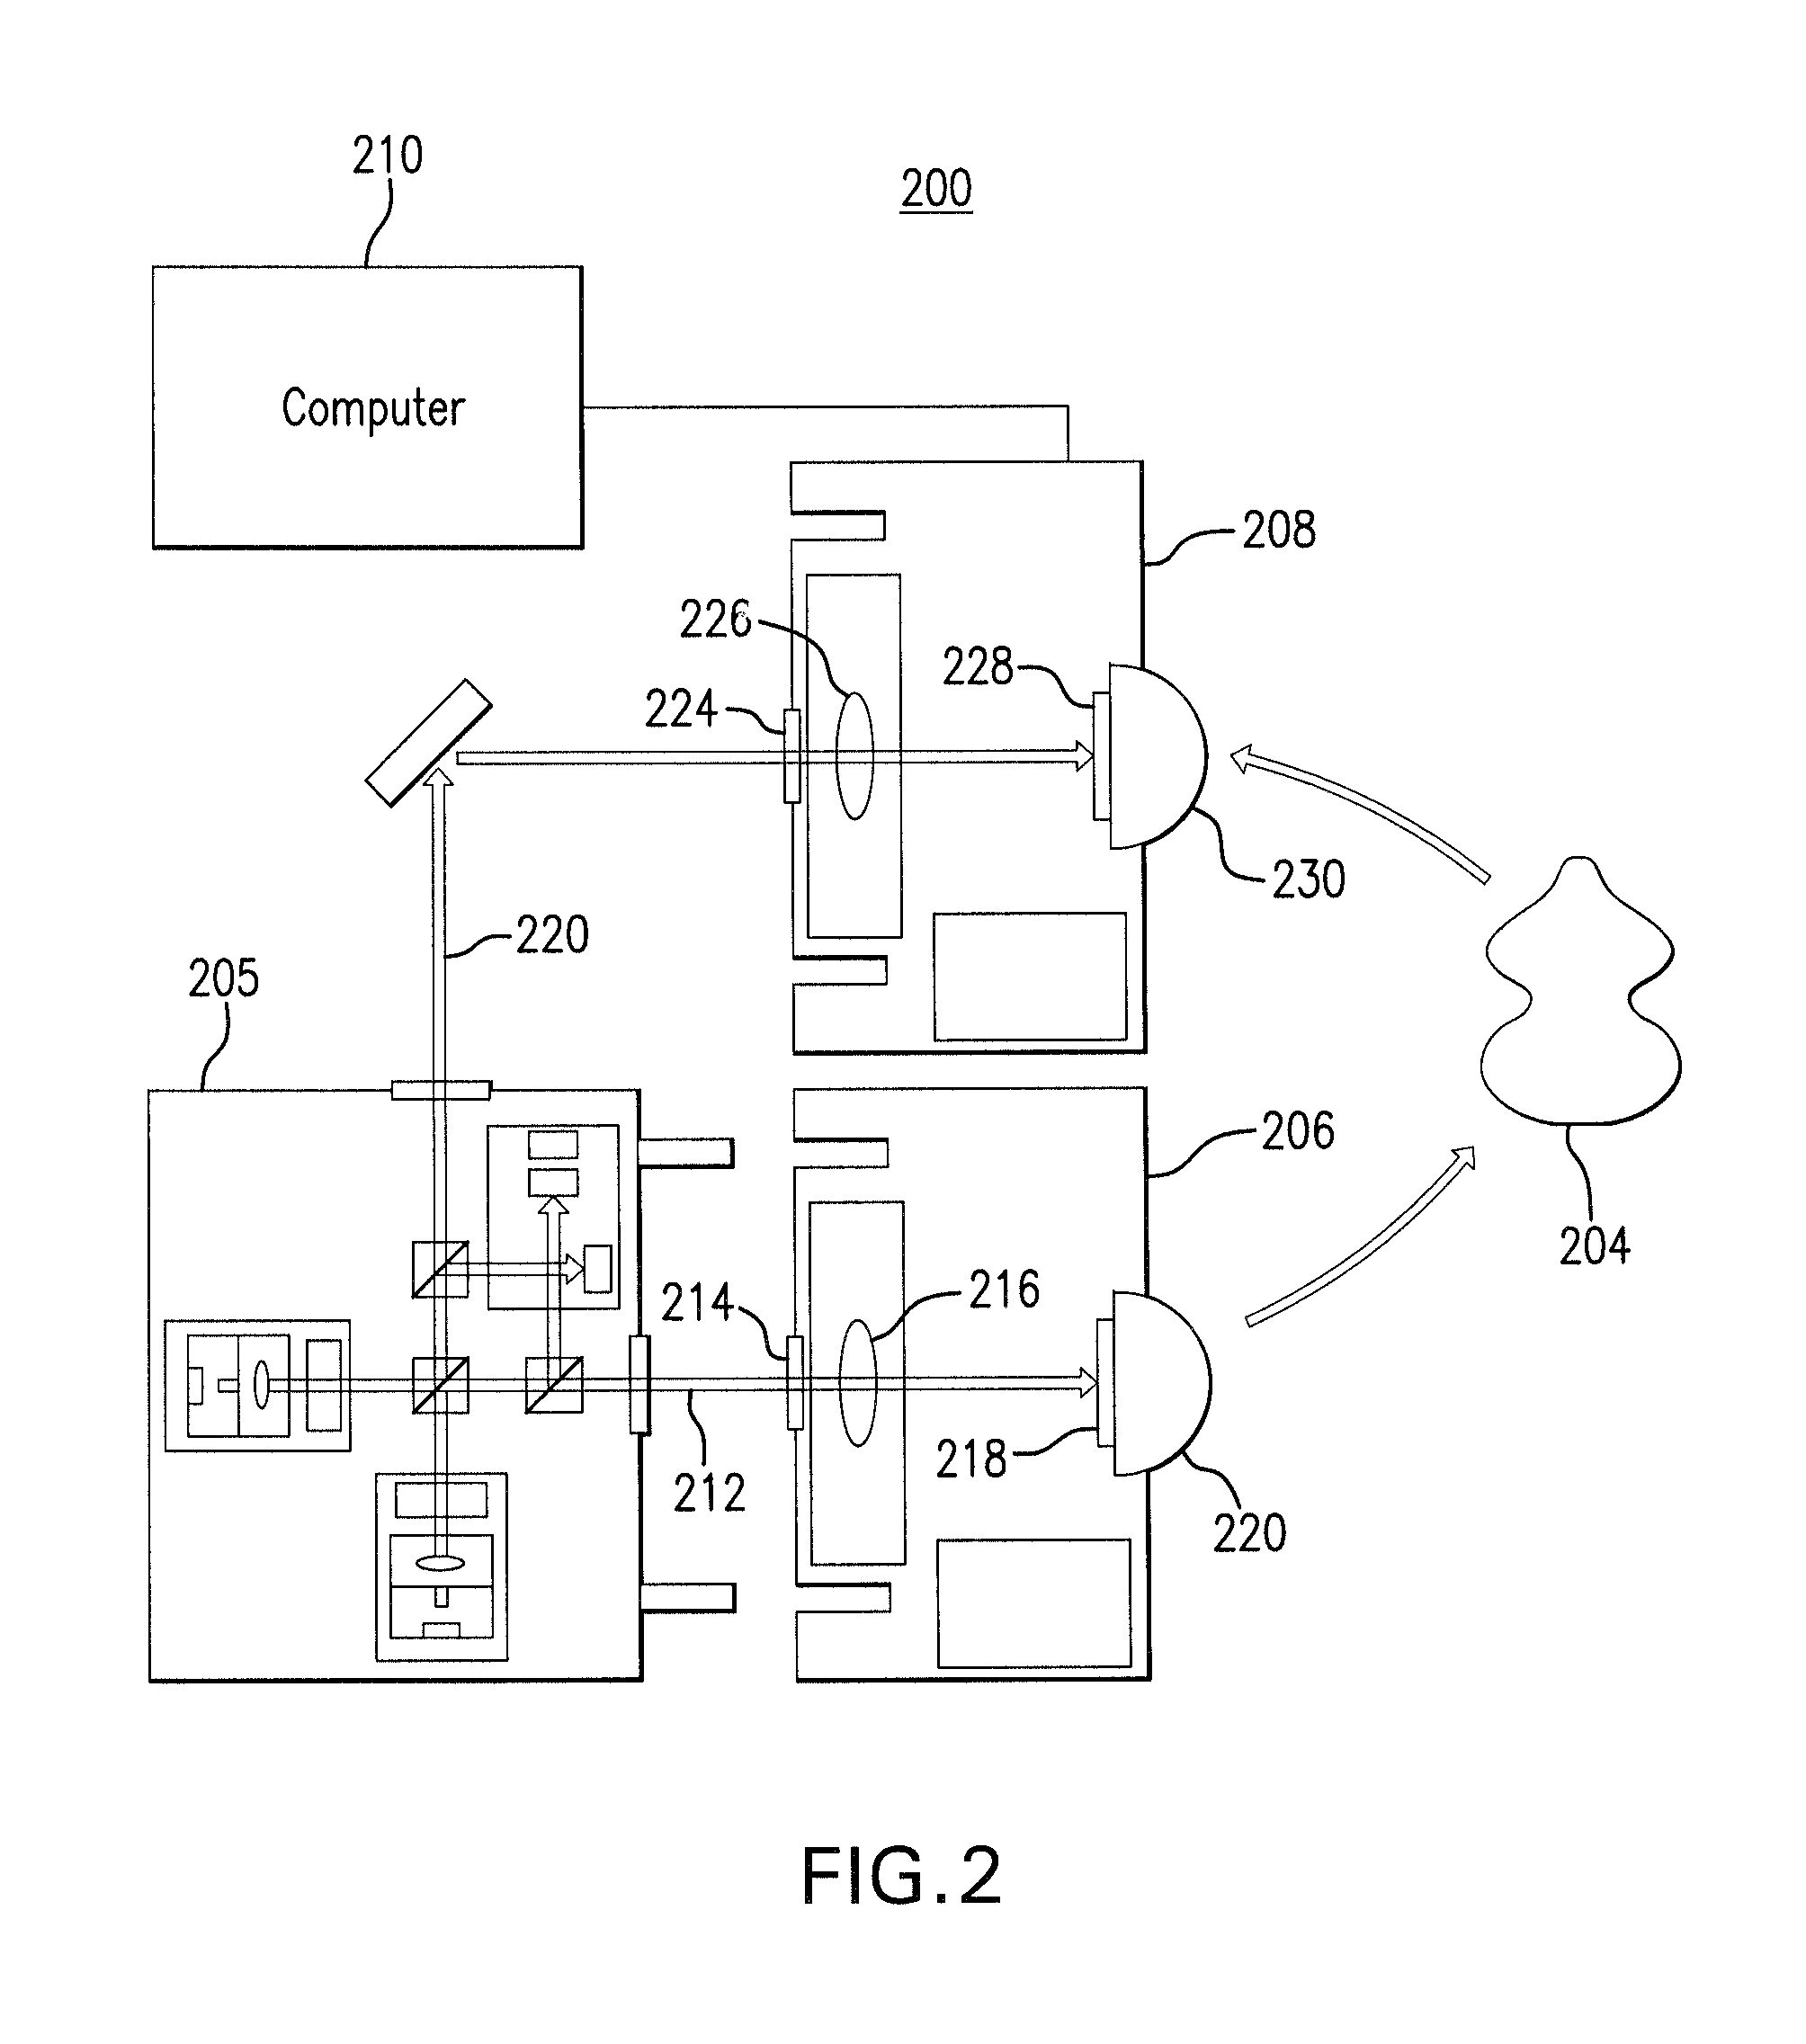 Method of detecting contaminant materials in food products